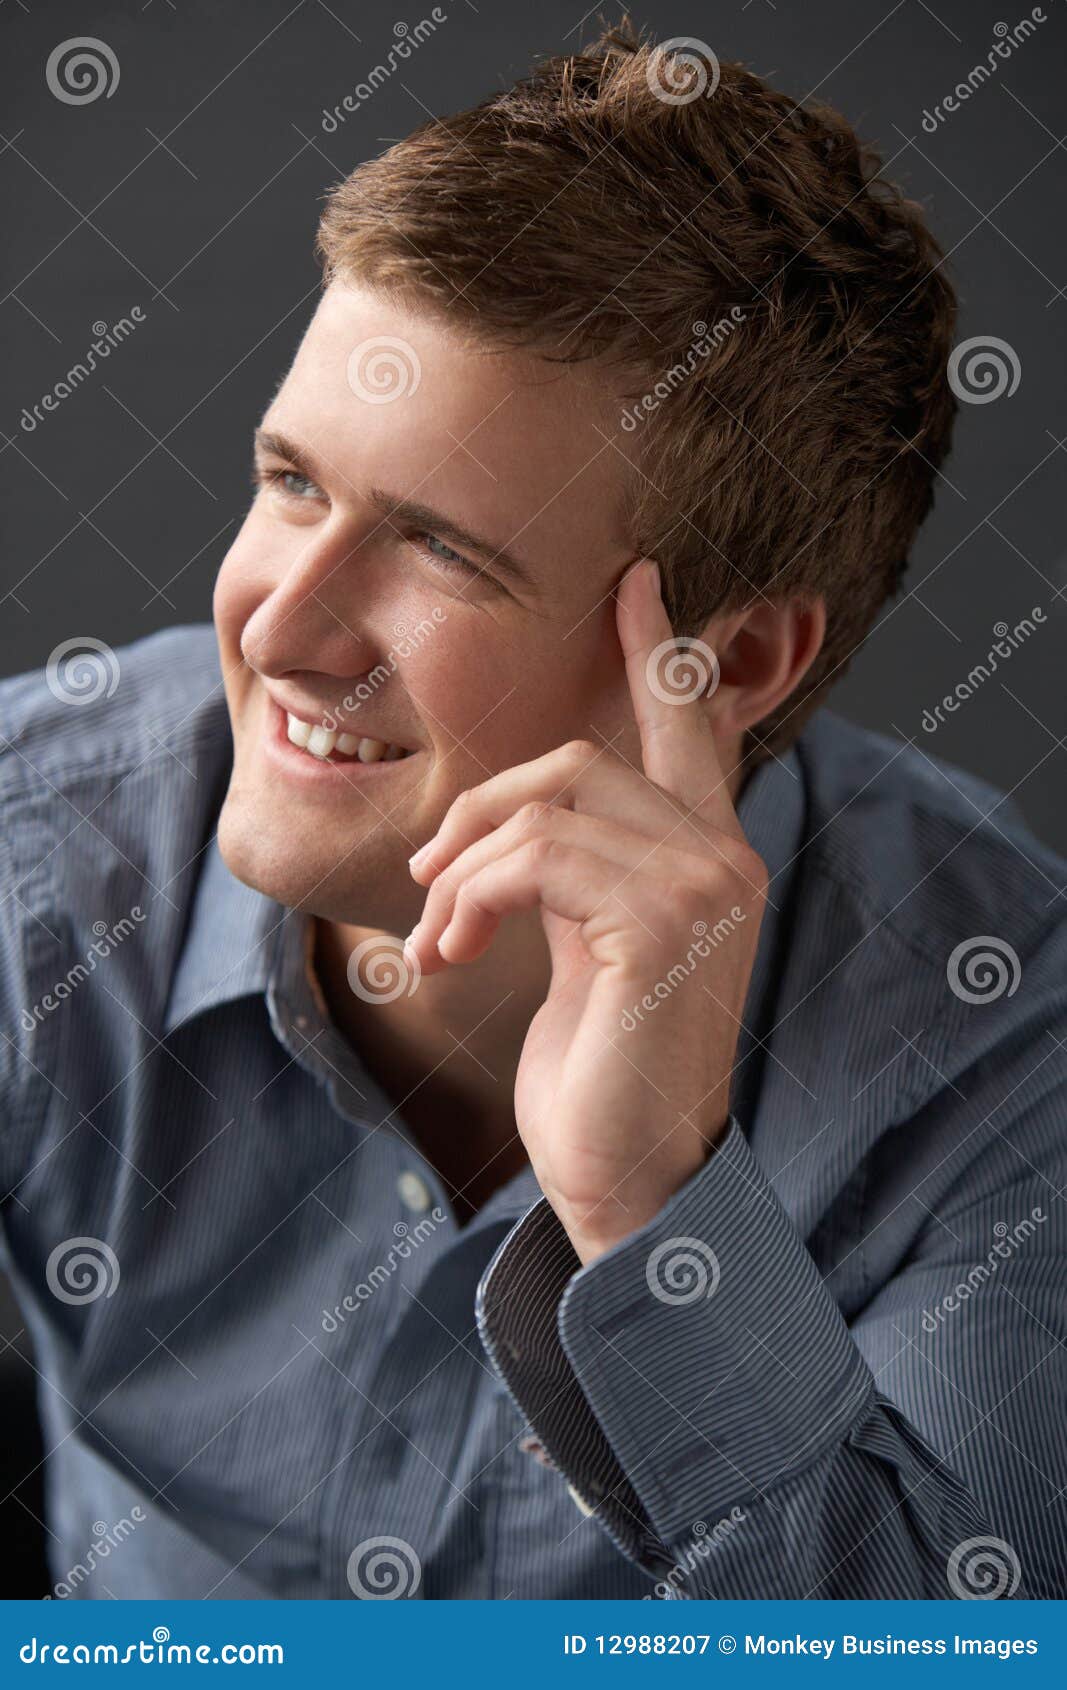 Head And Shoulders Portrait Of Young Man In Studio Stock Image - Image